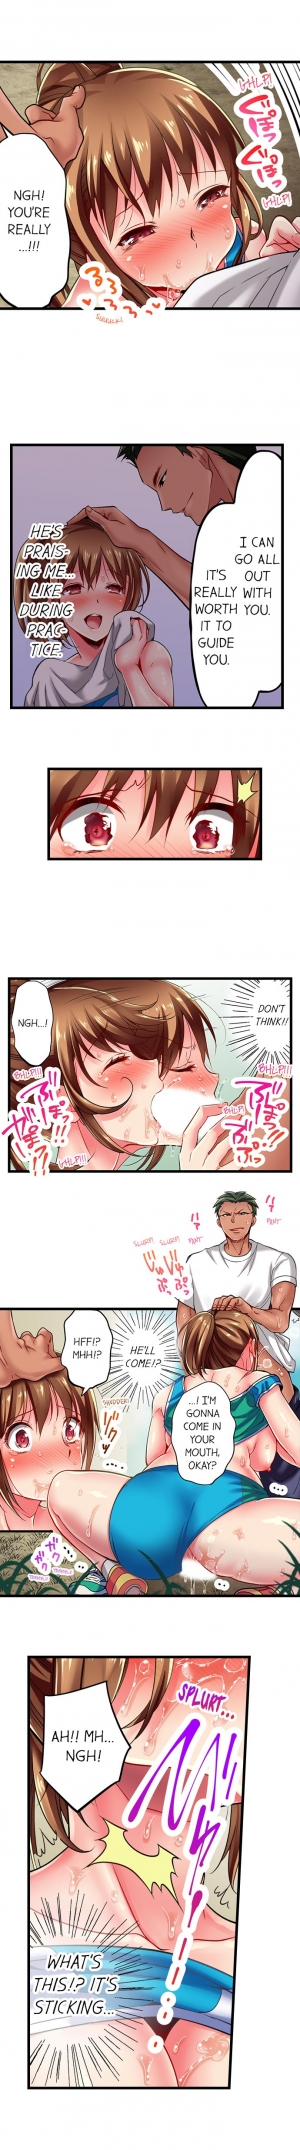 [Momoshika Fujiko] Only i Know Her Cumming Face Ch. 1 - 9 (Ongoing) [English] - Page 54